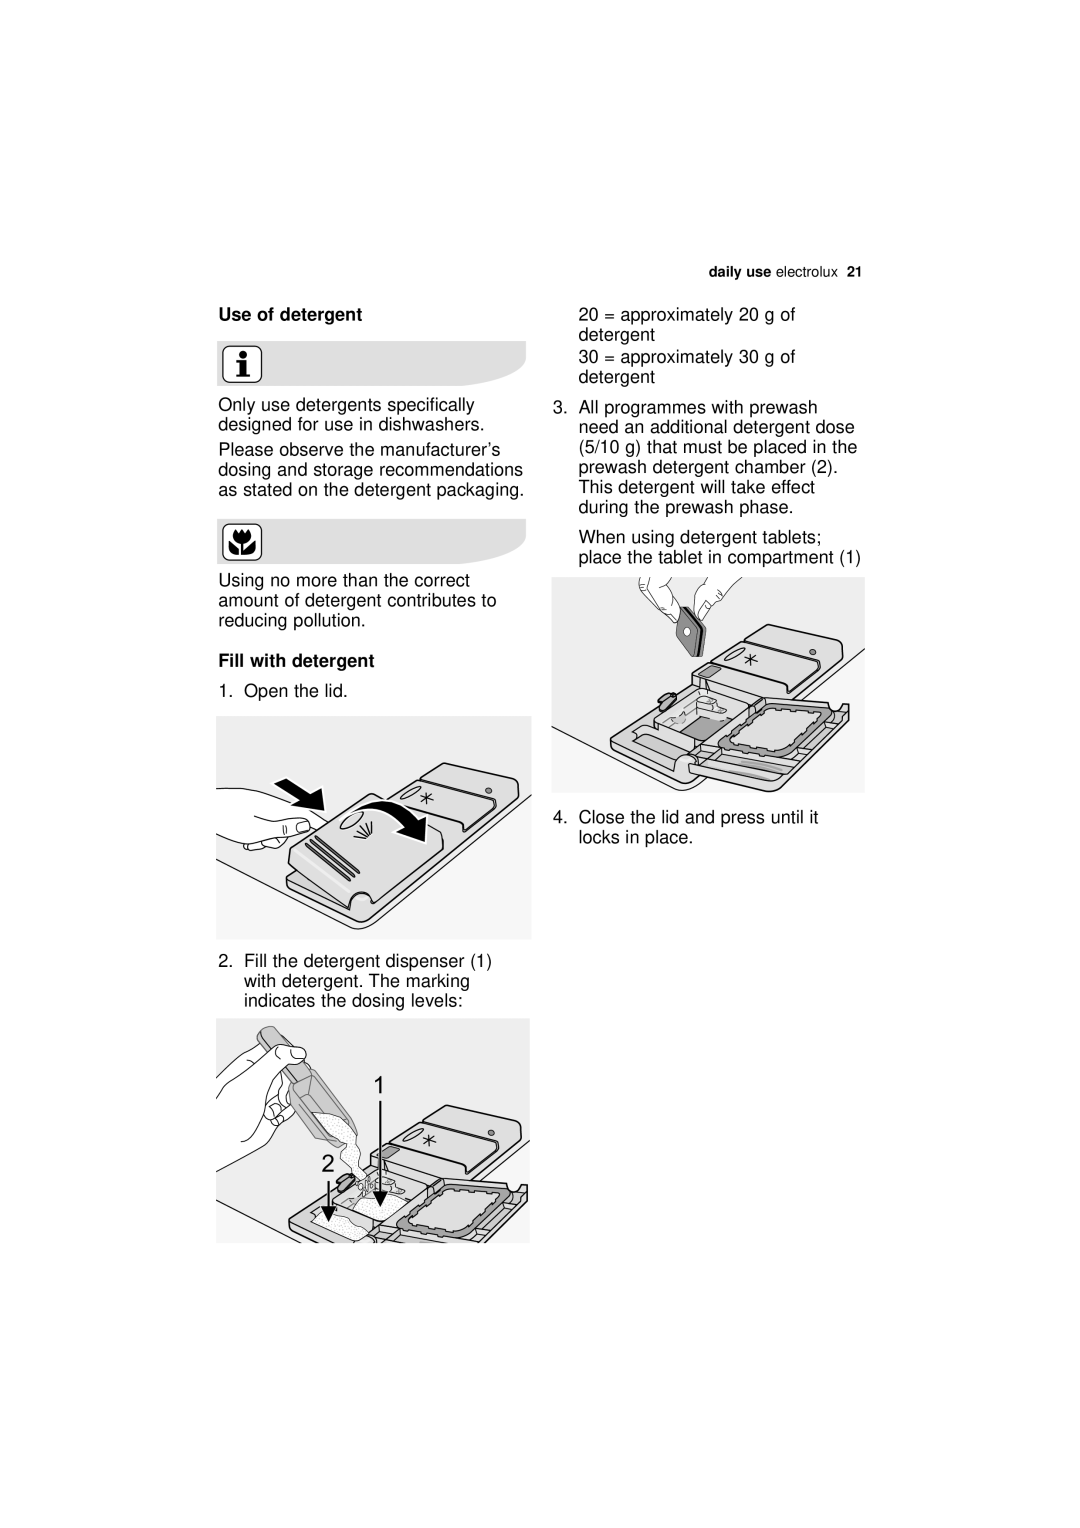 Electrolux ESI 63010 user manual Use of detergent, Fill with detergent 